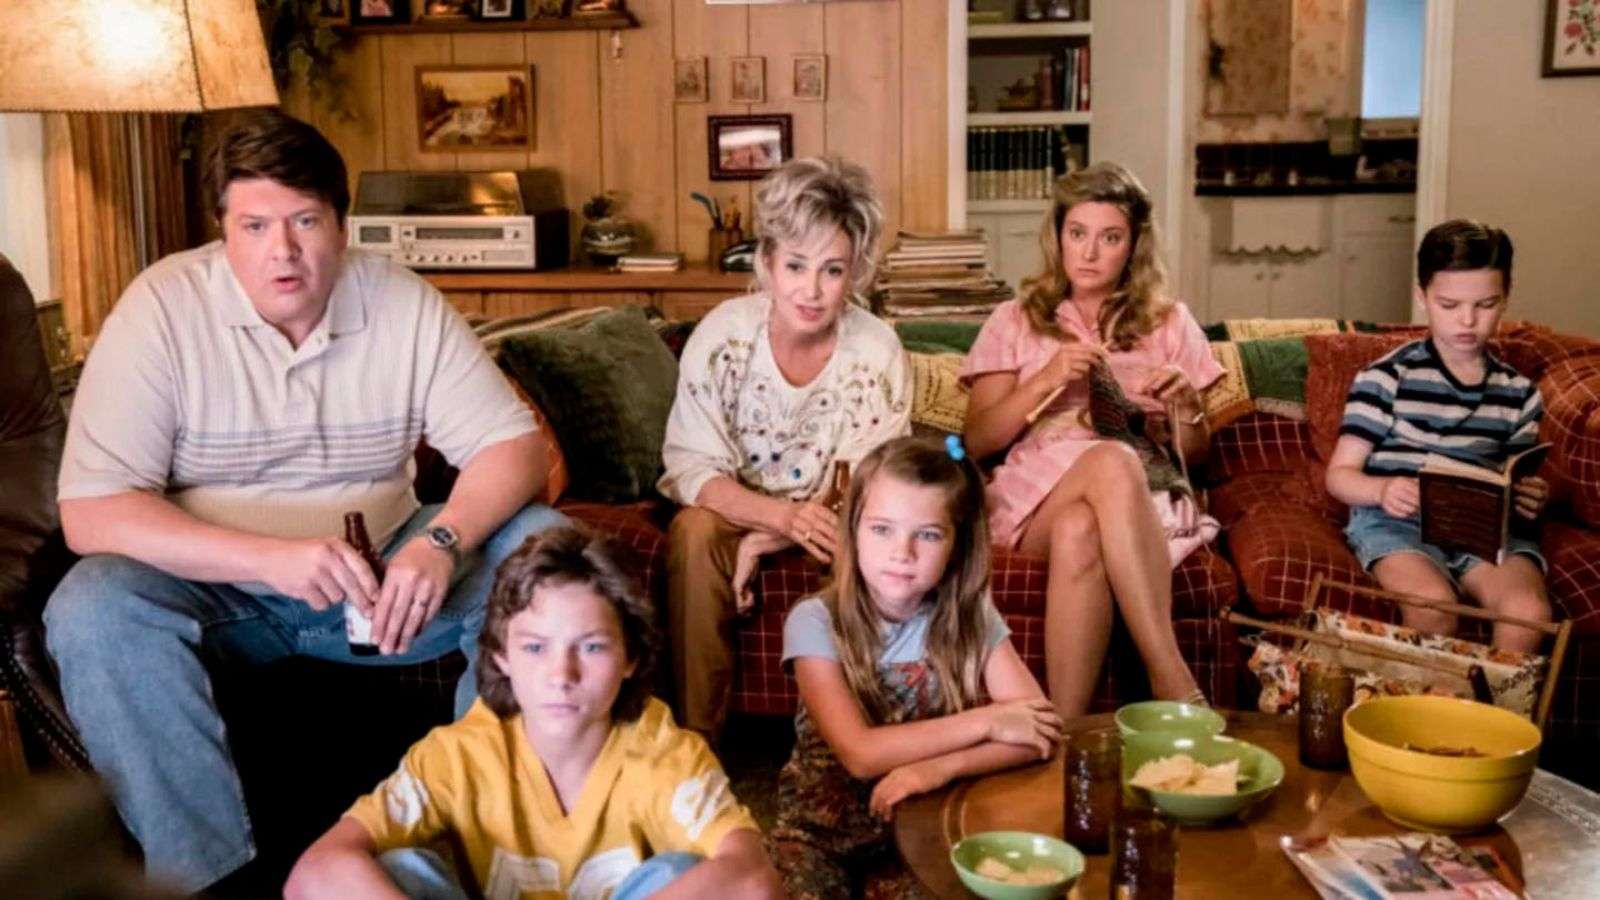 The Cooper family sit down to watch TV in Young Sheldon